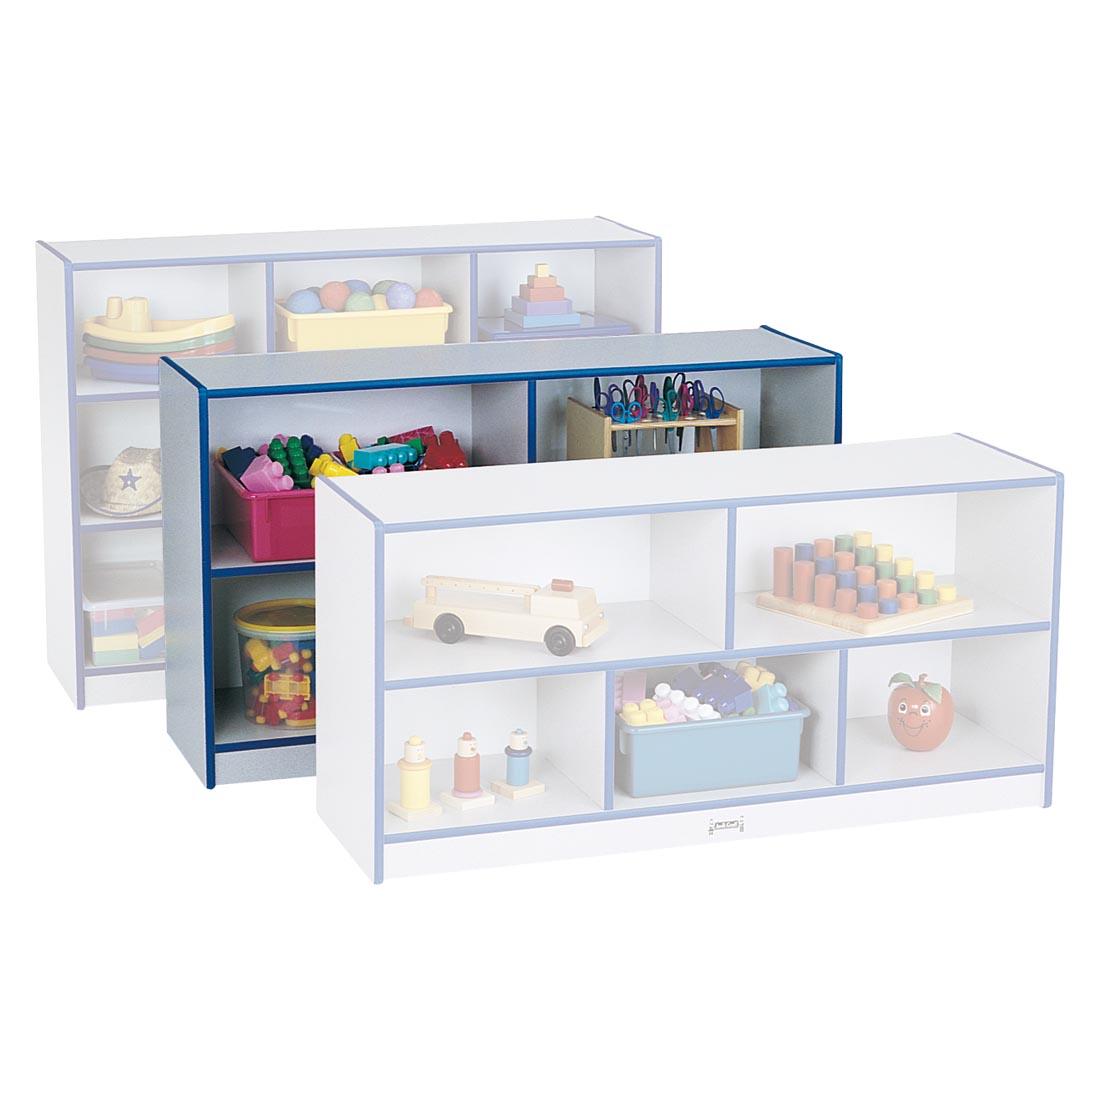 Blue Edge Rainbow Accents Single Mobile Storage Unit Low Height with a unit both in front and behind to show scale; shown with suggested storage contents